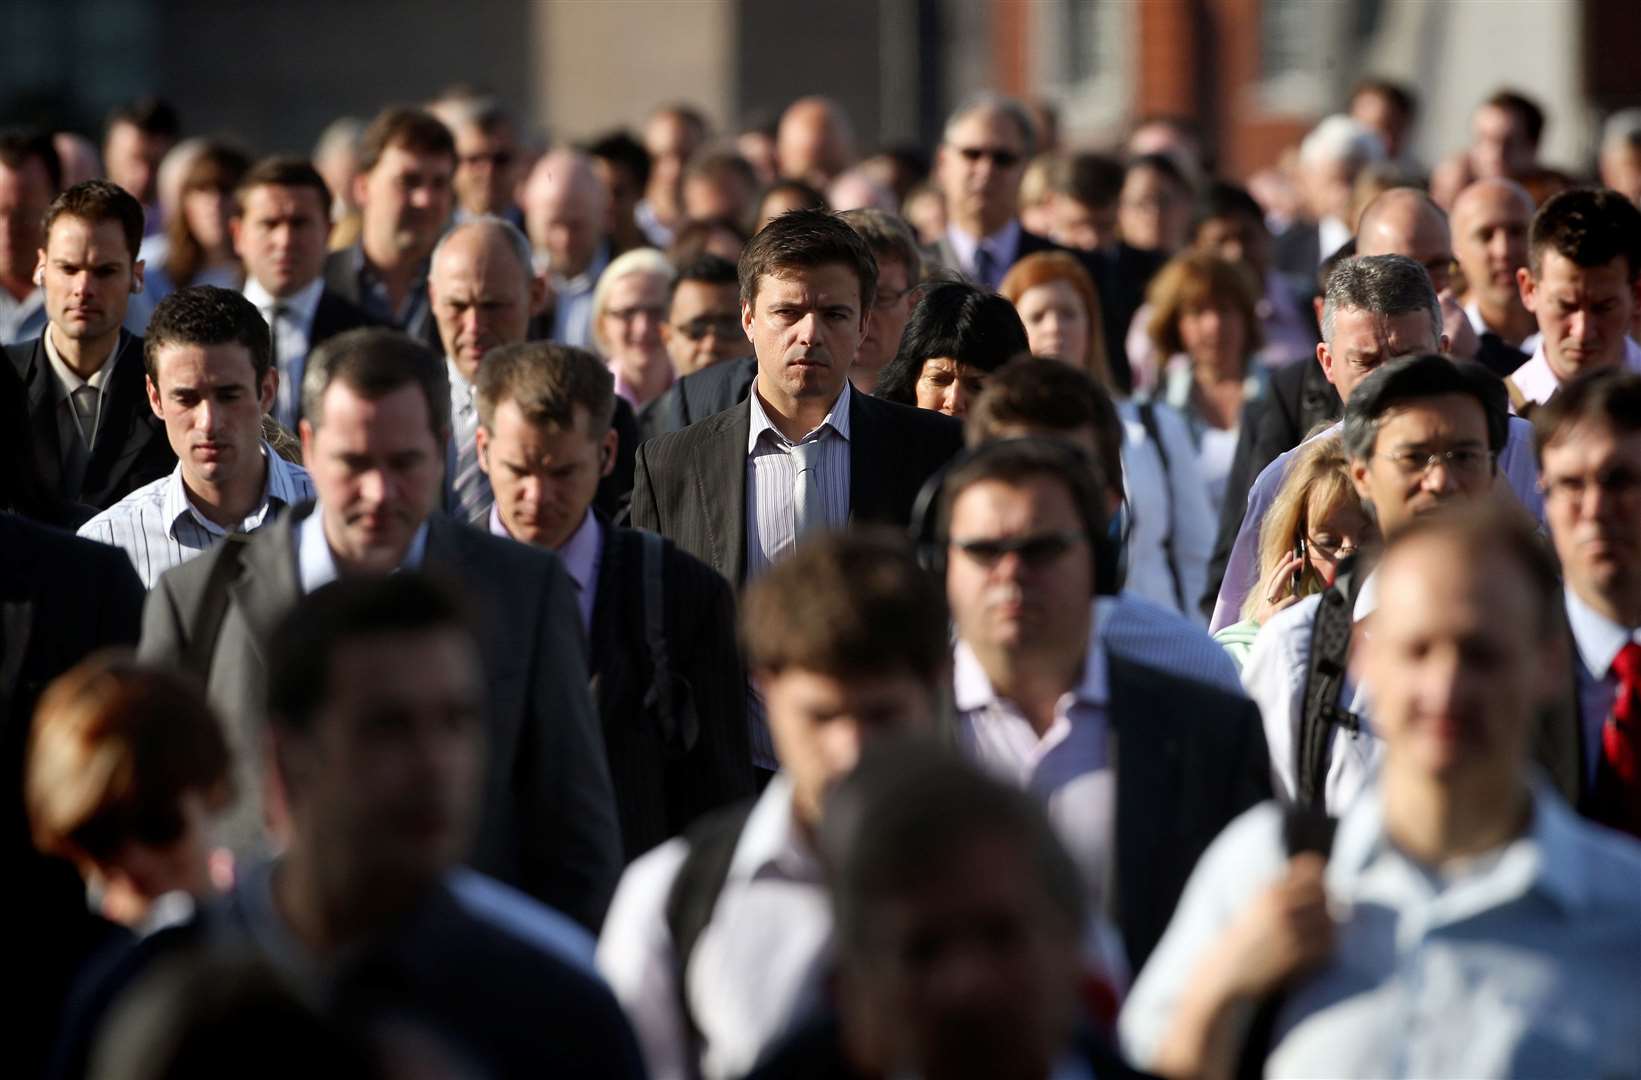 Population growth is the ‘underlying cause of many problems’